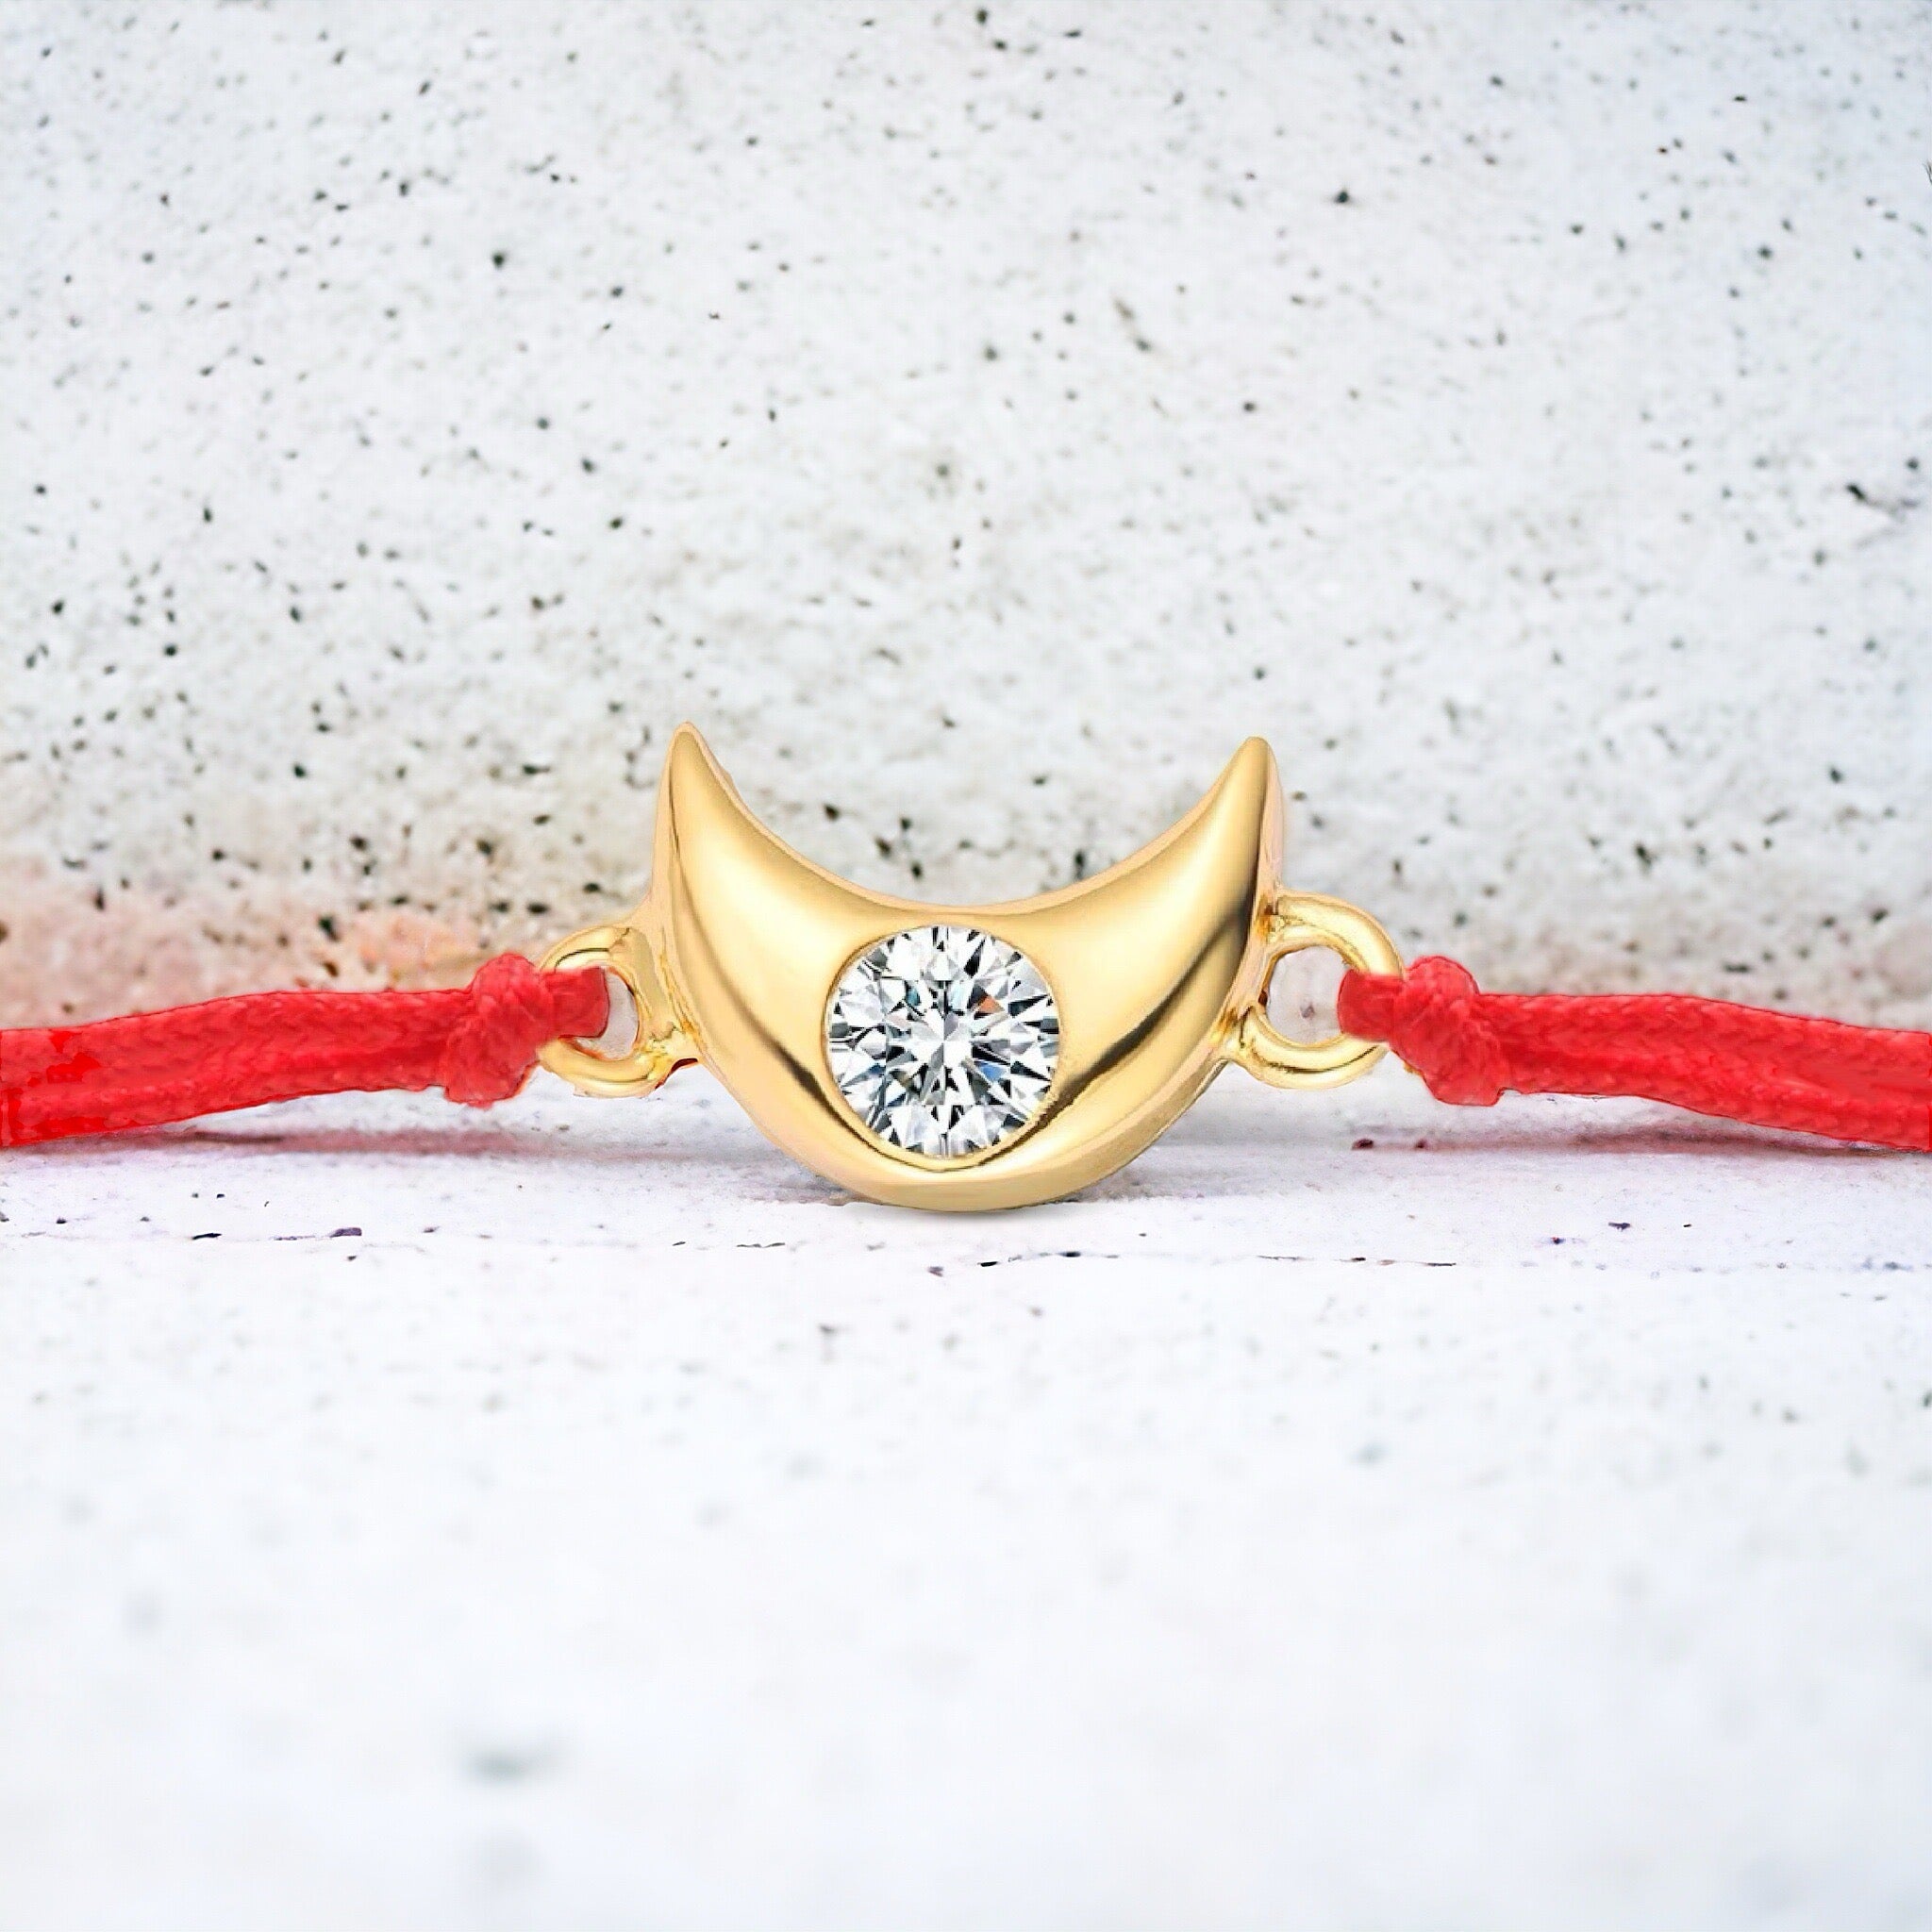 Little Gold Moon Charm Red String Protection Bracelet - My Harmony Tree